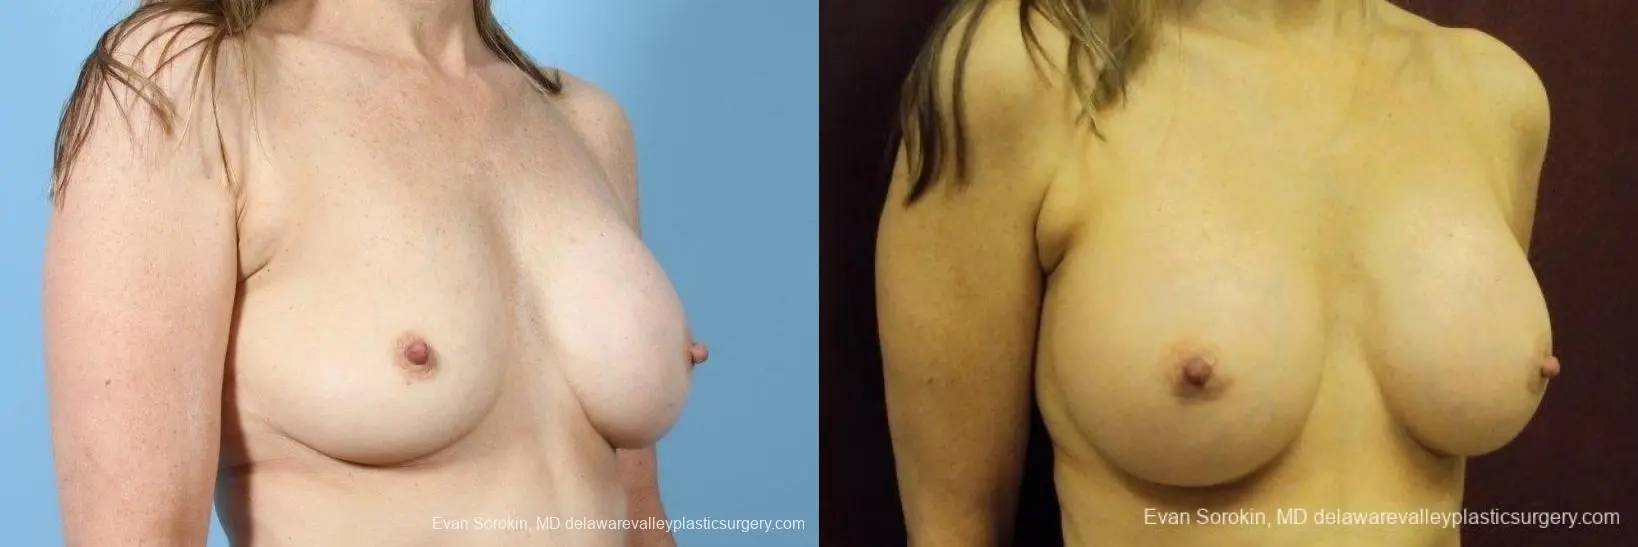 Philadelphia Breast Augmentation 8708 - Before and After 2